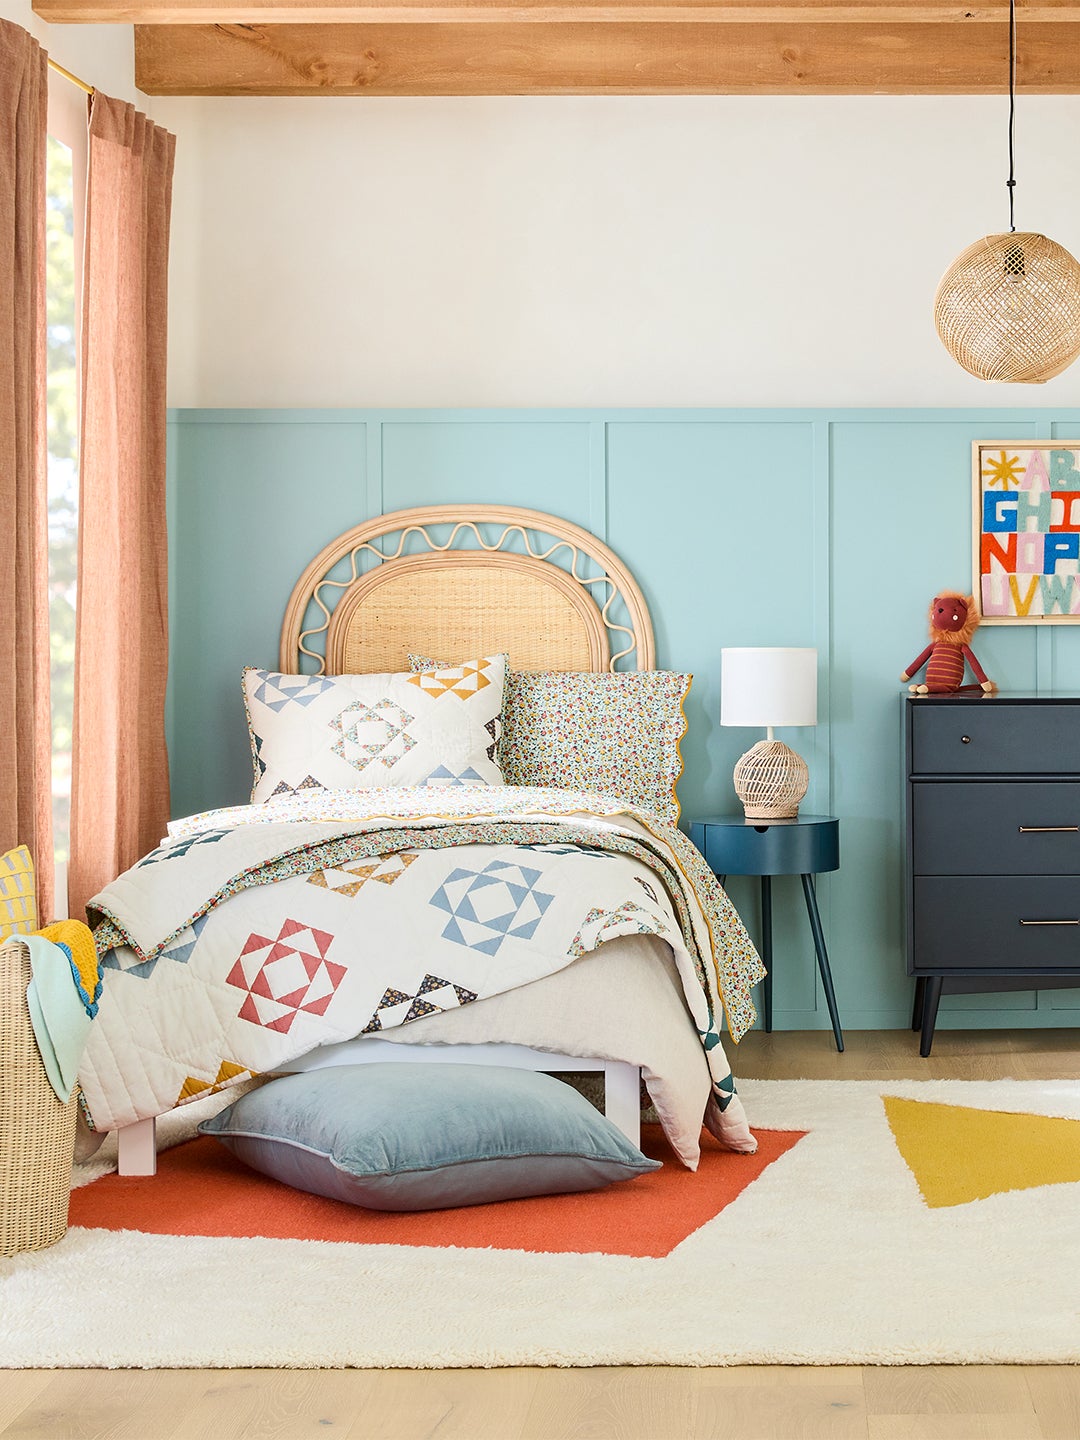 We Not So Secretly Want West Elm Kids’s New Toy Baskets for Closet Organization